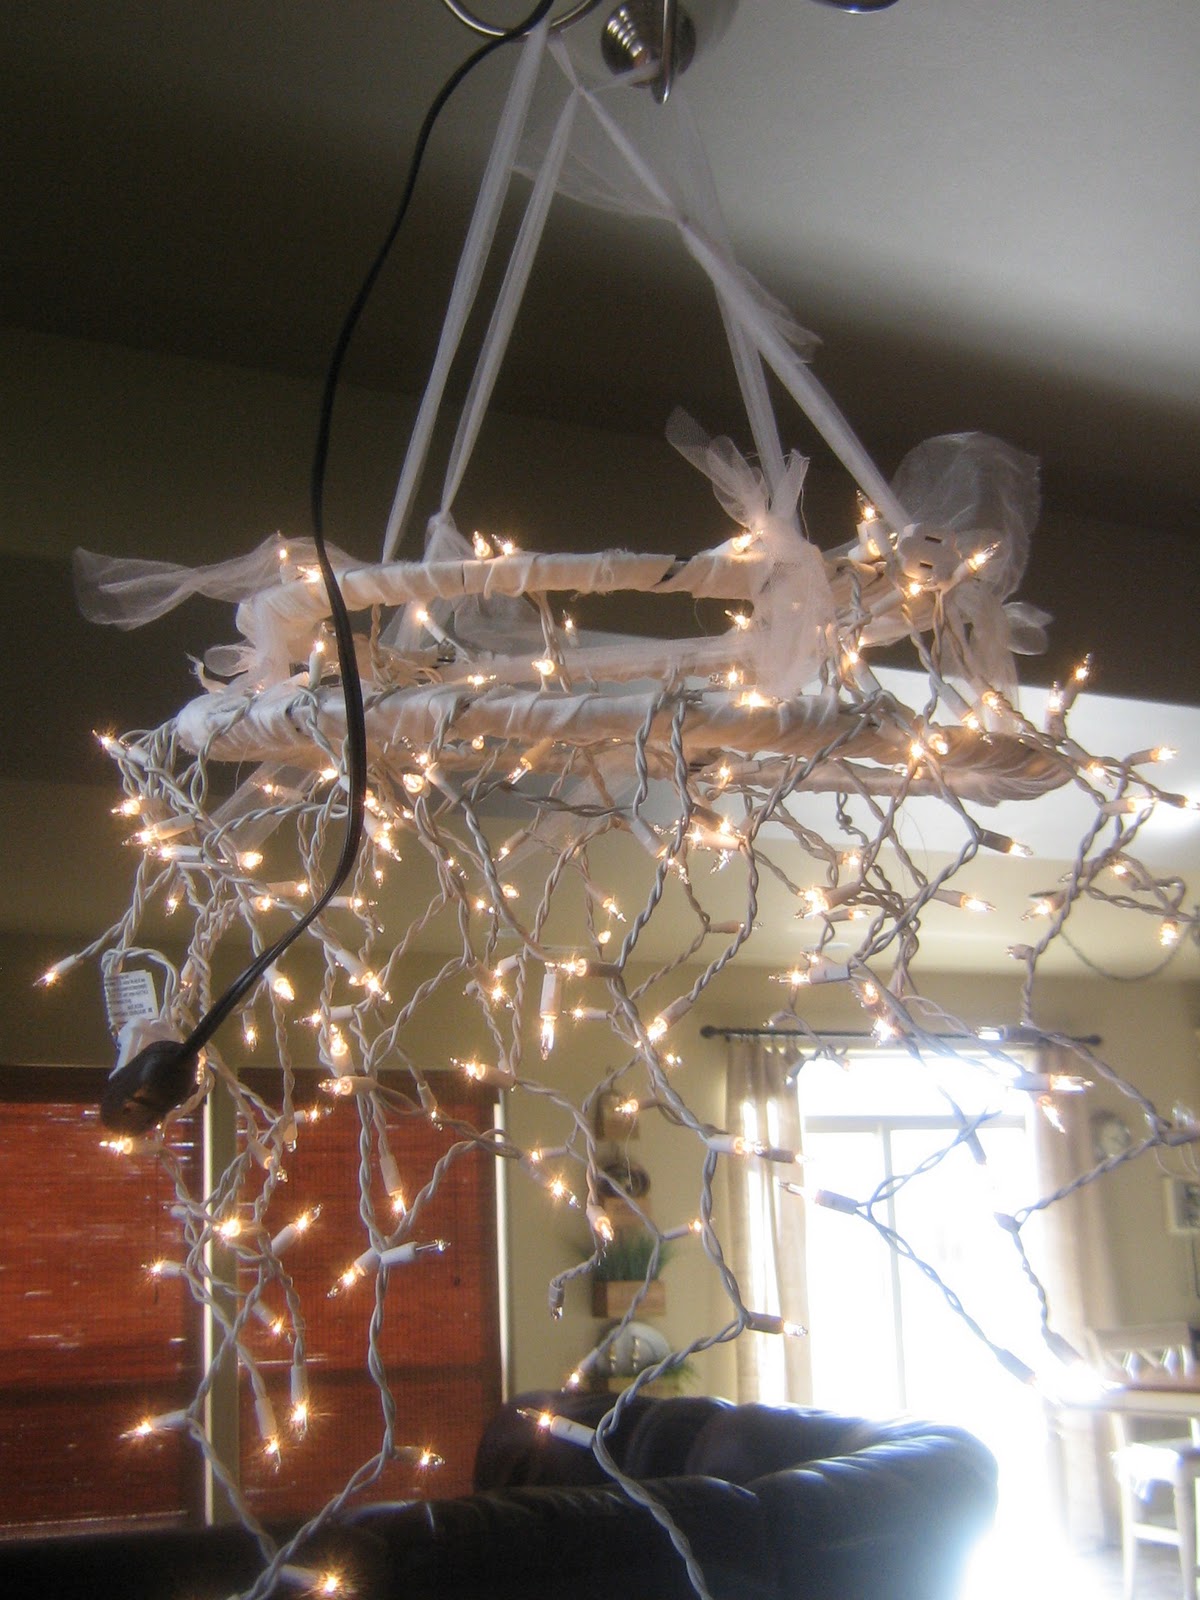 Home is where they love you: Christmas Light Chandelier